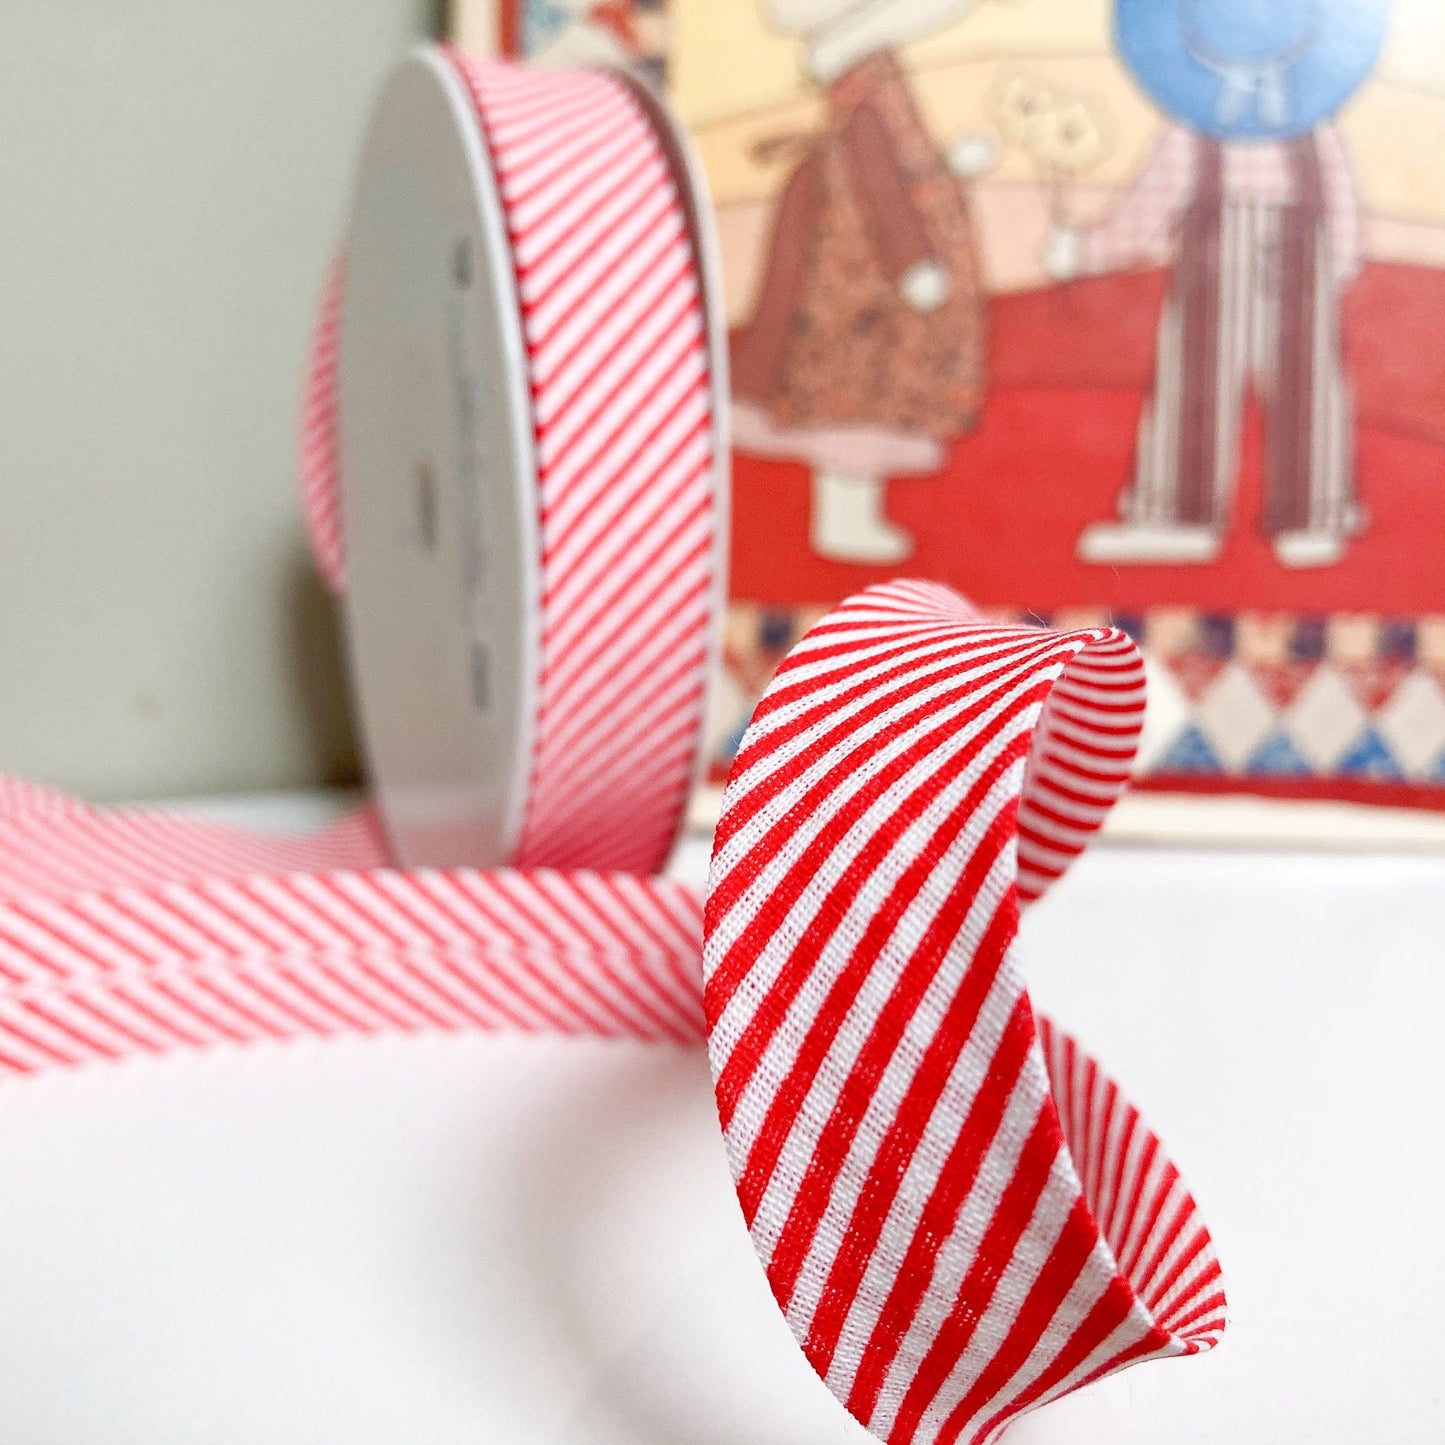 20 mm Cotton Bias Binding in Red and White Candy Stripe